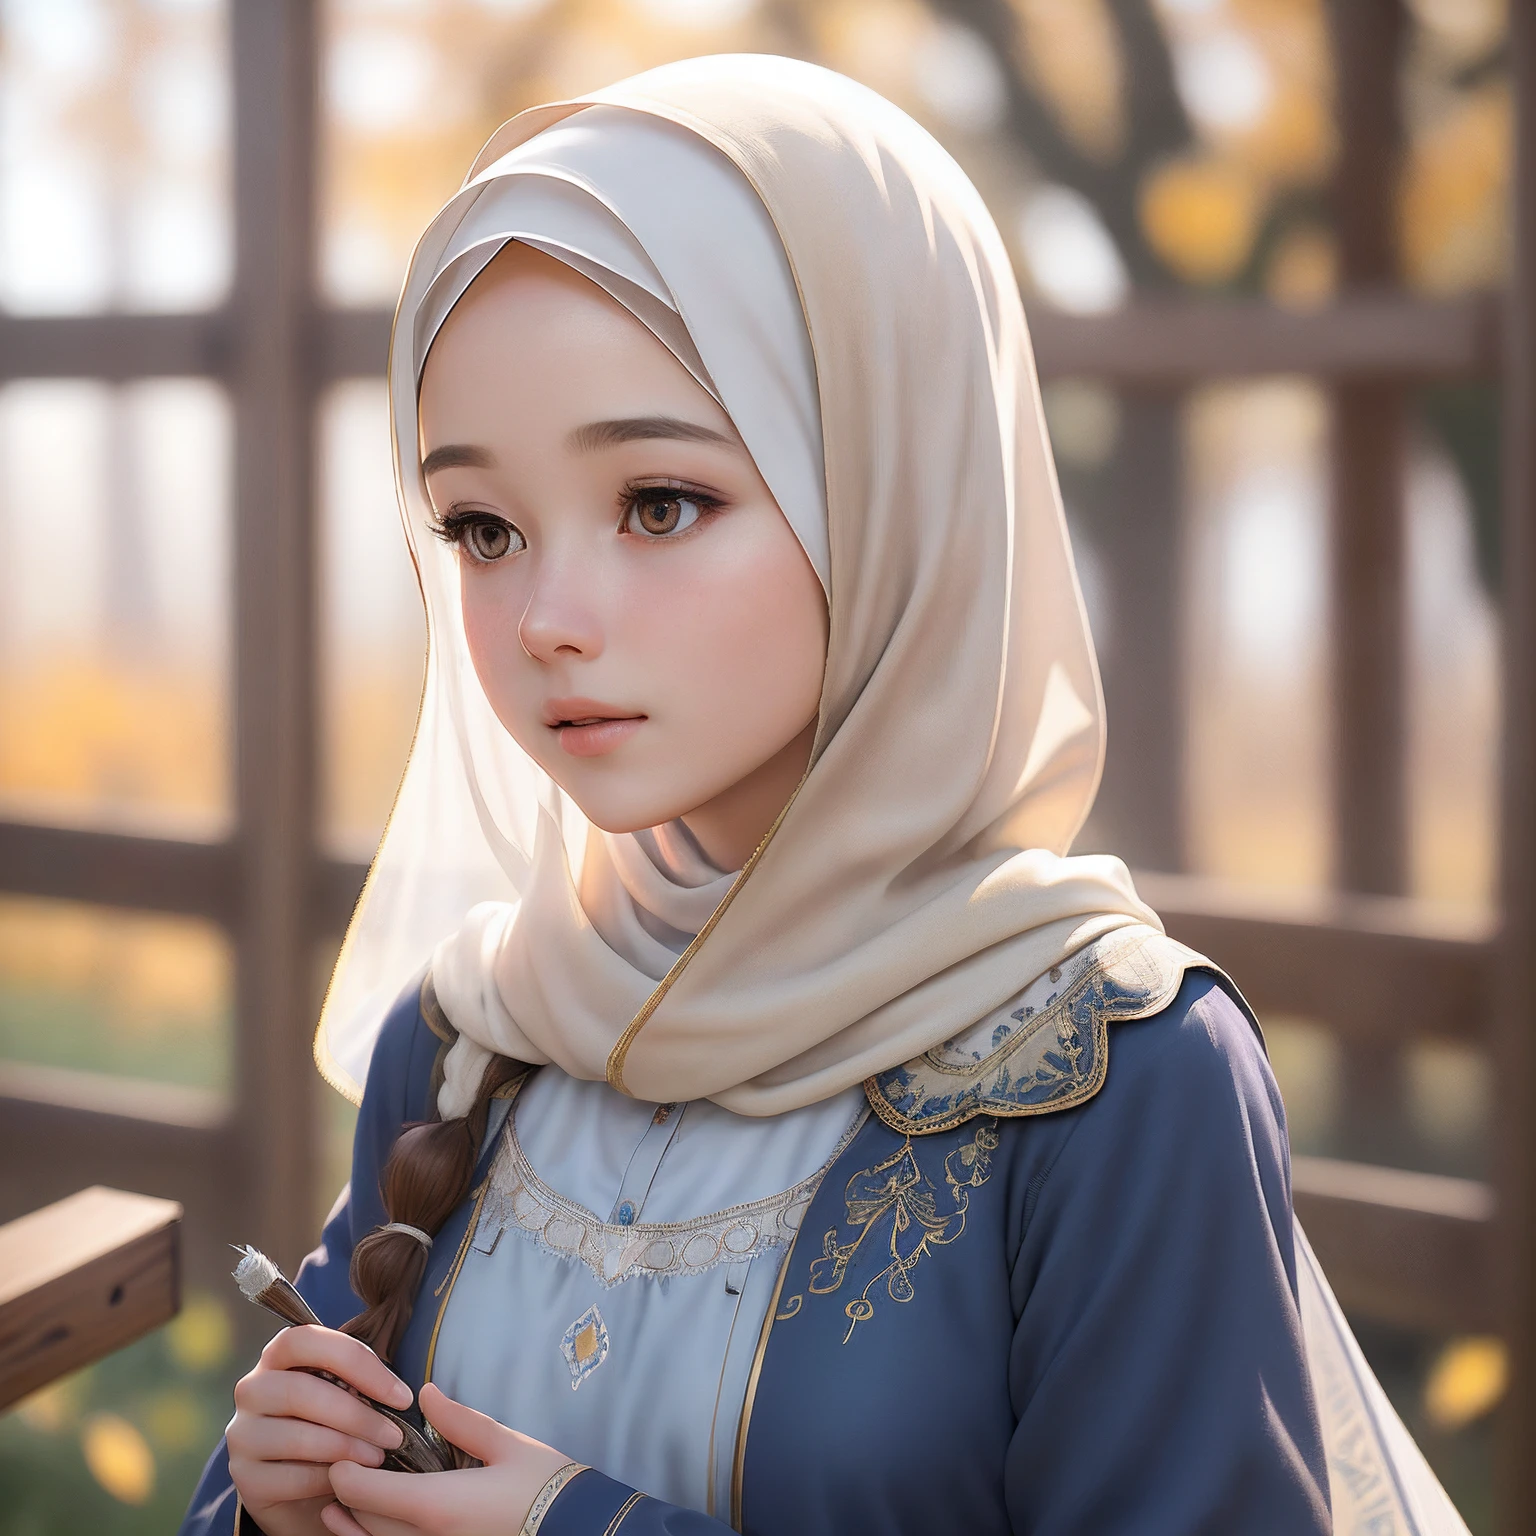 (RAW photo, best quality), (realistic, photo-realistic:1.3), 1 girl, solo girl, extremely delicate and beautiful, Amazing, finely detail, masterpiece, ultra-detailed, highres,(best illustration), (best shadow),intricate,depth of filed, On a summer afternoon, a lovely blue female muslim dress with tunic, pashmina hijabs, hijab, In the golden hues of autumn, creating a soothing sound, shine eyes, immersing herself in harmony with nature, No hair,(blurry background:1.4), sharp focus, volumetric fog, 8k UHD, high quality, (film grain:1.4), apertur f/1.4,